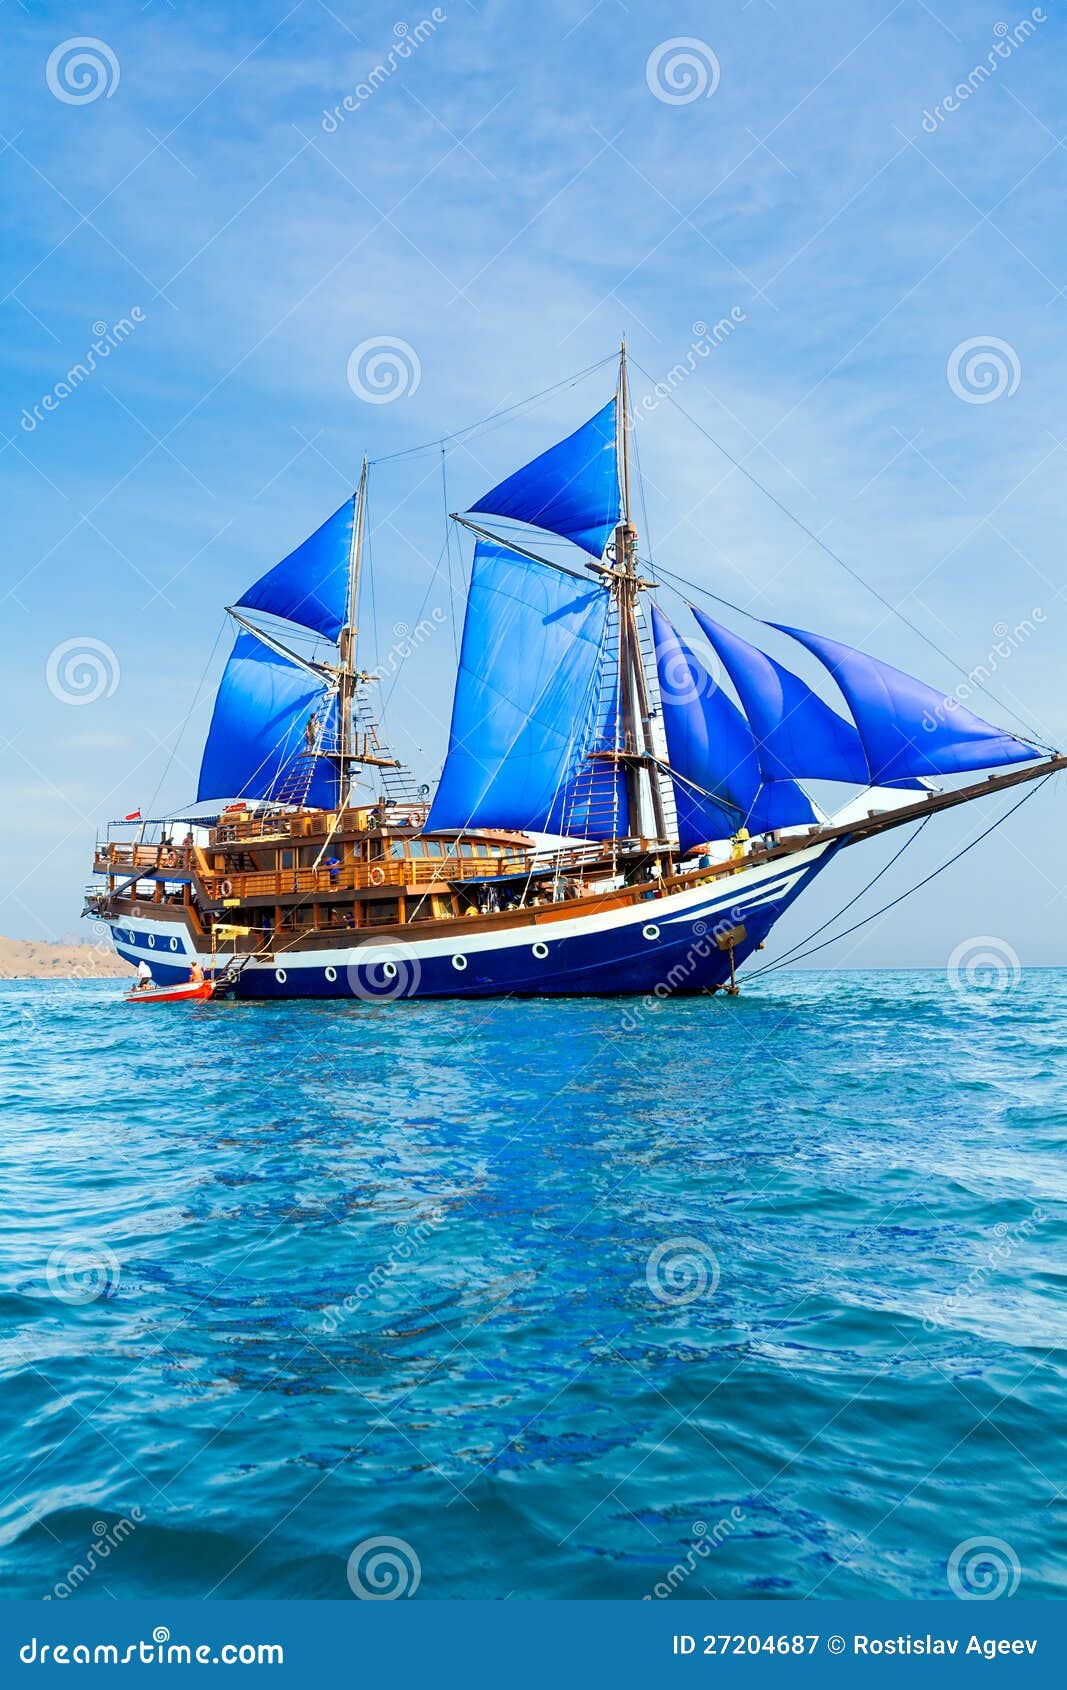 vintage wooden ship with blue sails stock image - image of